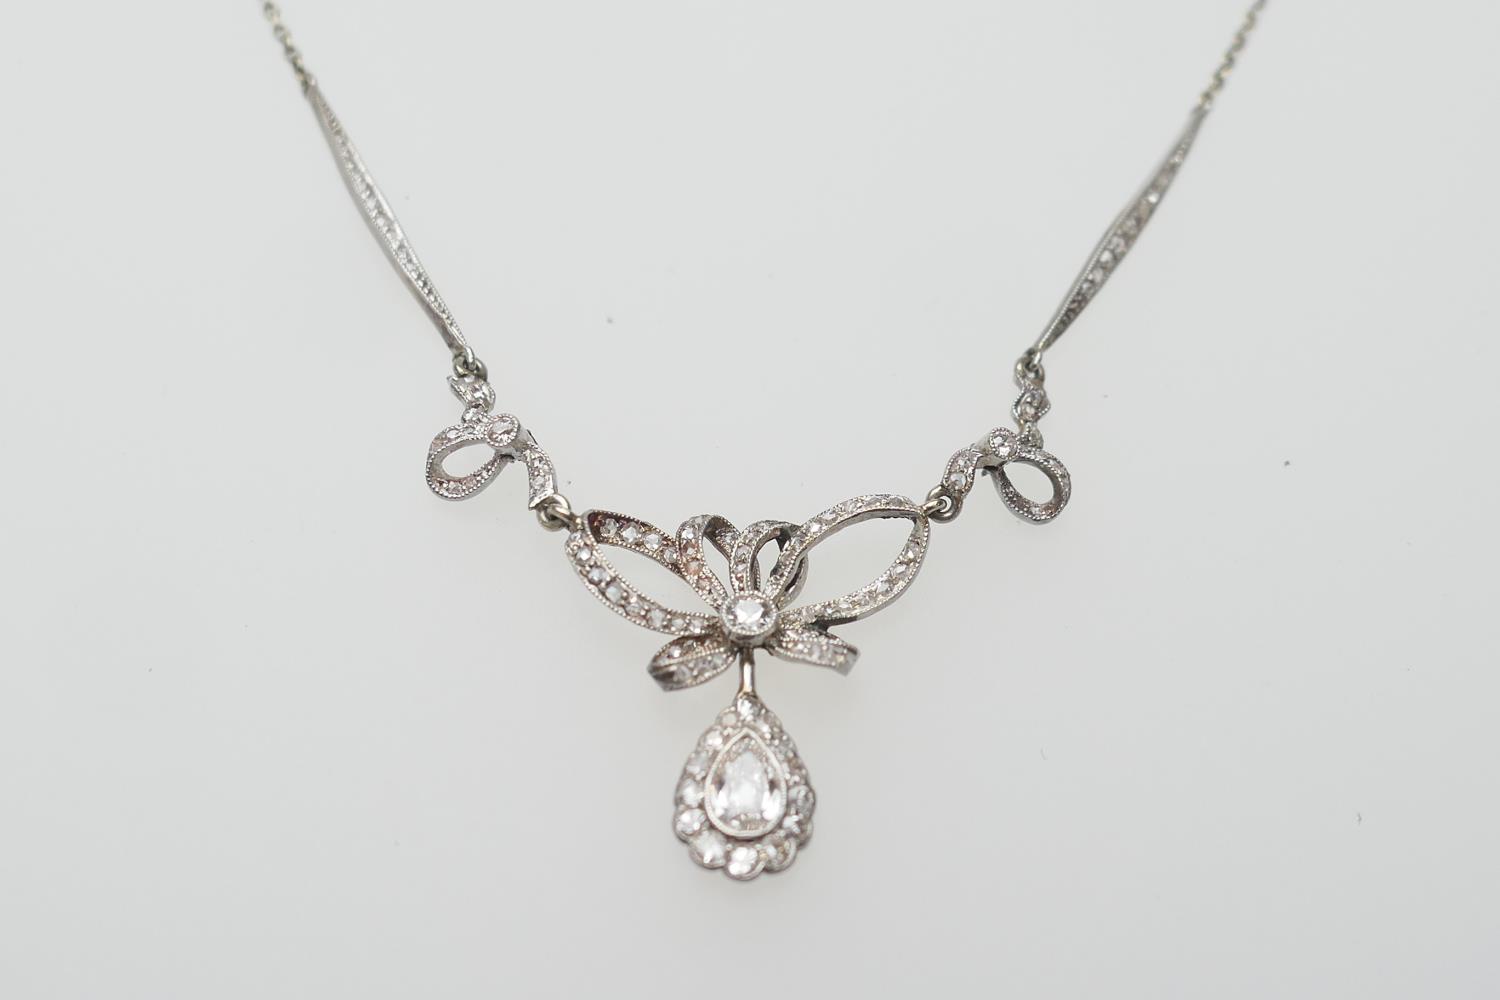 Diamond pendant necklace, centred with a pear cut diamond of approx. 0.5ct, colour estimated as G/H,